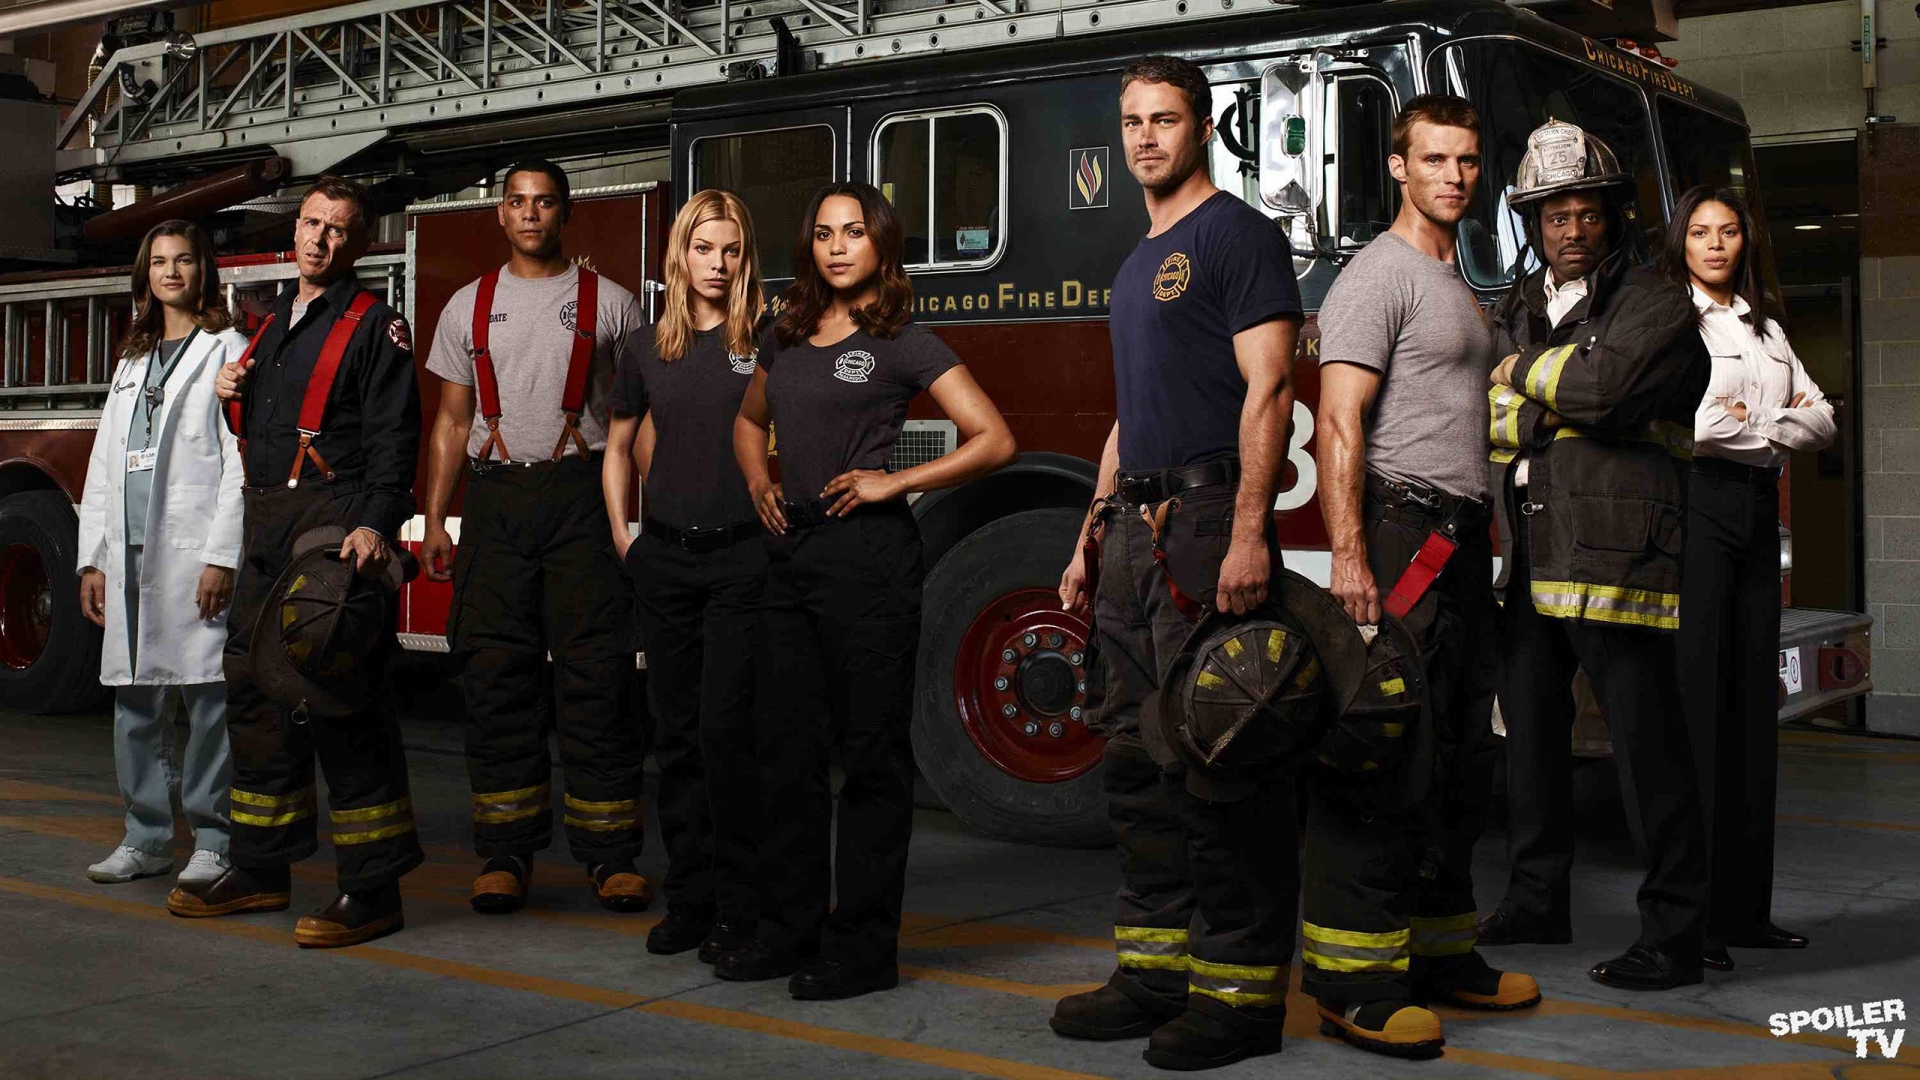 Chicago Fire Tv Show for 1920 x 1080 HDTV 1080p resolution